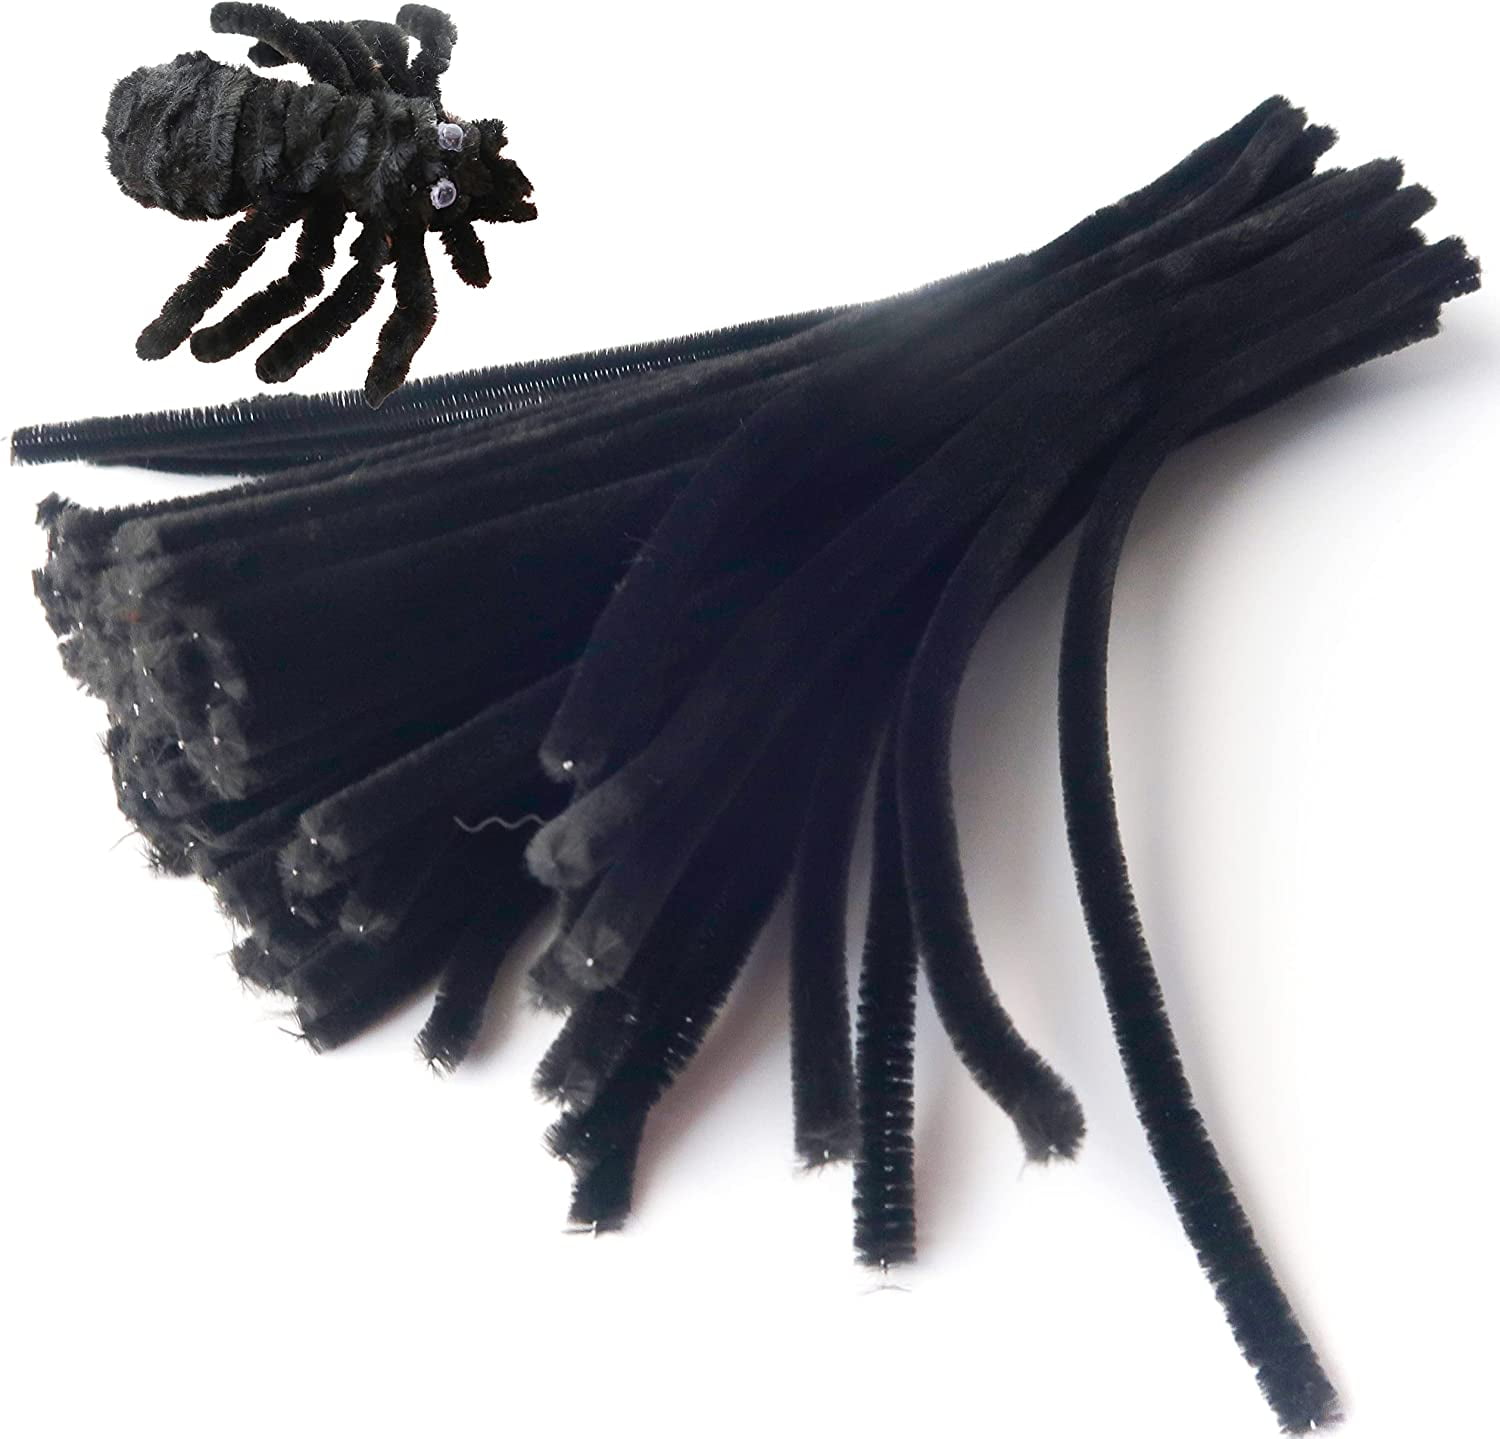 TOCOLES 600pcs Craft Pipe Cleaners, Black Chenille Stems White Pipe Cleaners for DIY Art Craft Decorations (6 mm x 12 inch)